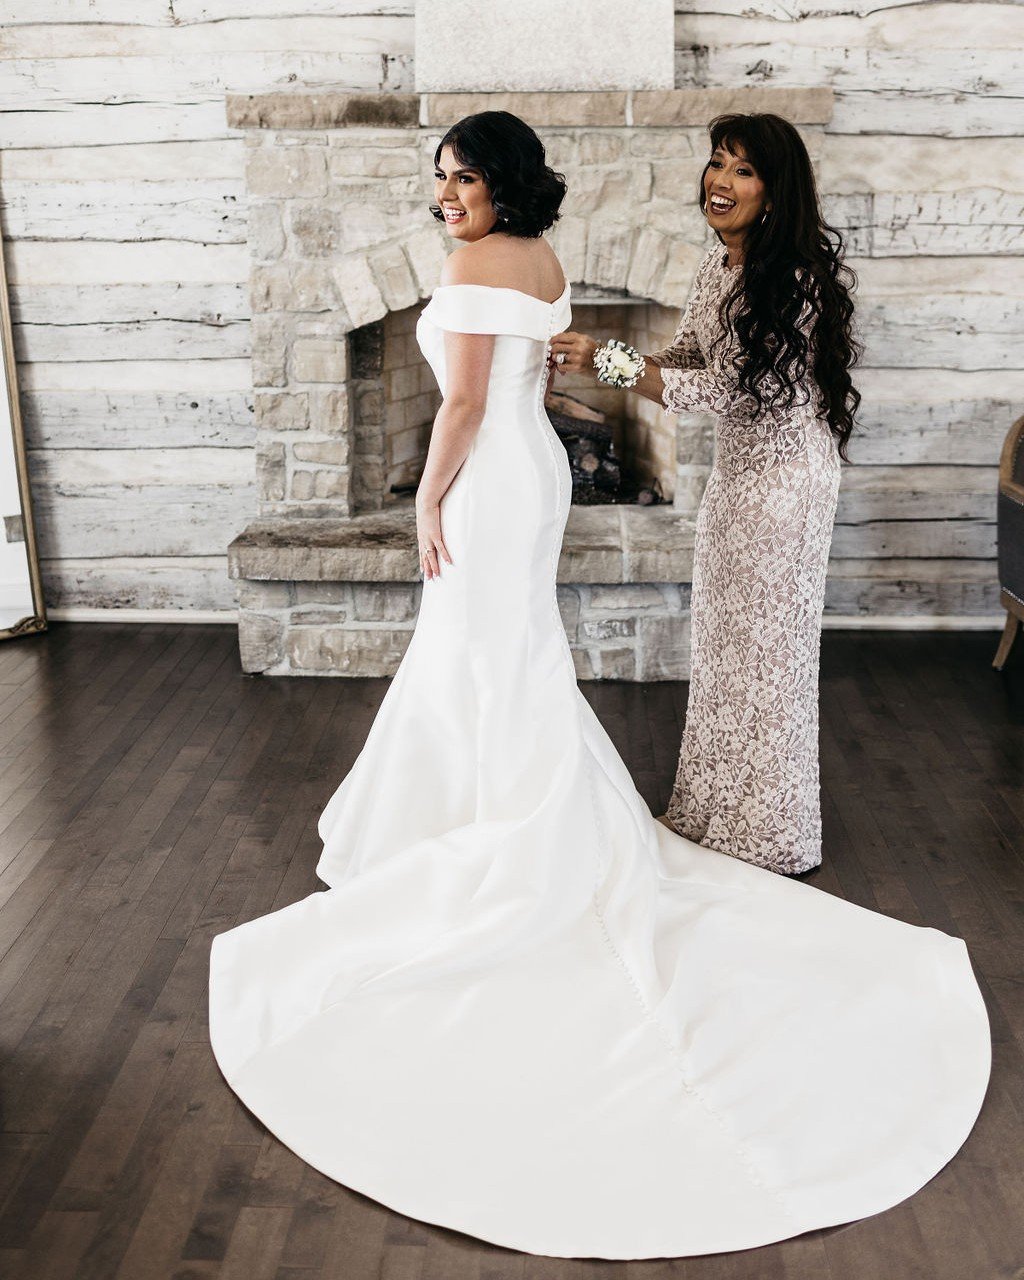 How about this wedding dress?!😍 Such a ✨CLASSIC✨

💍St. Louis Wedding Vendors💍
Wedding Photographer: @jessandjennphotography
Wedding Day Caterer: @grazecatering
Florist: @rootandrelic
Cakes/Sweets: @sarahscakeshop
Dress Shop: @sincerelyyoursbridals